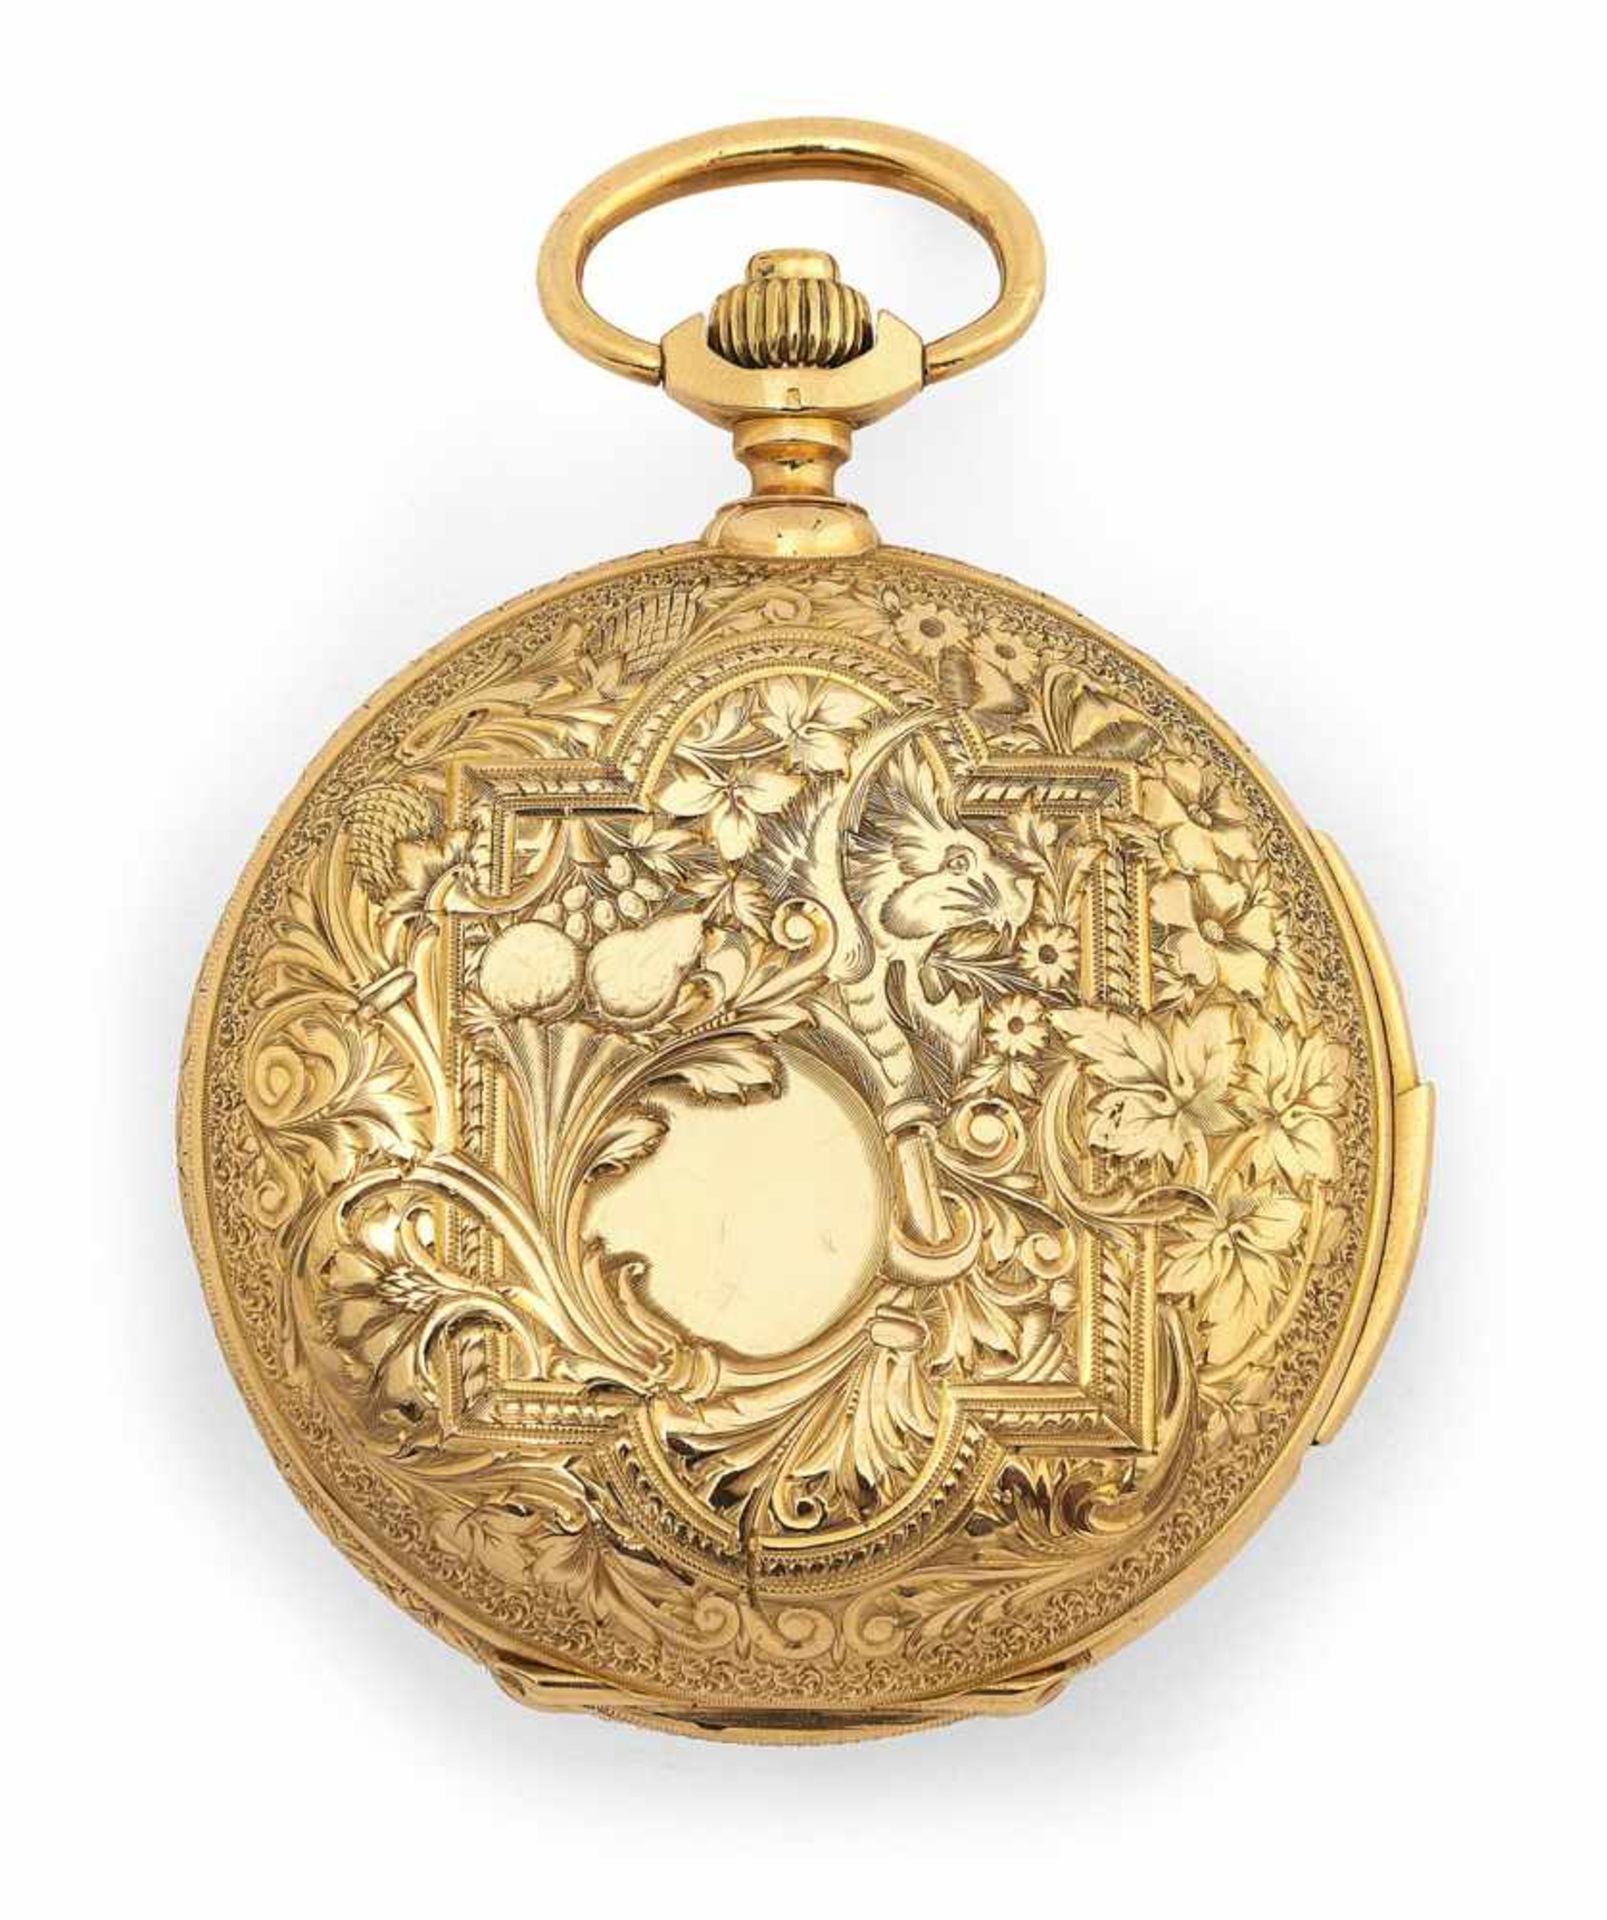 A fine 18ct. gold savonette hunter watch, signed C.J & A. PERRENOUD & CIE. LE LOCLE, N°1195, - Image 5 of 7